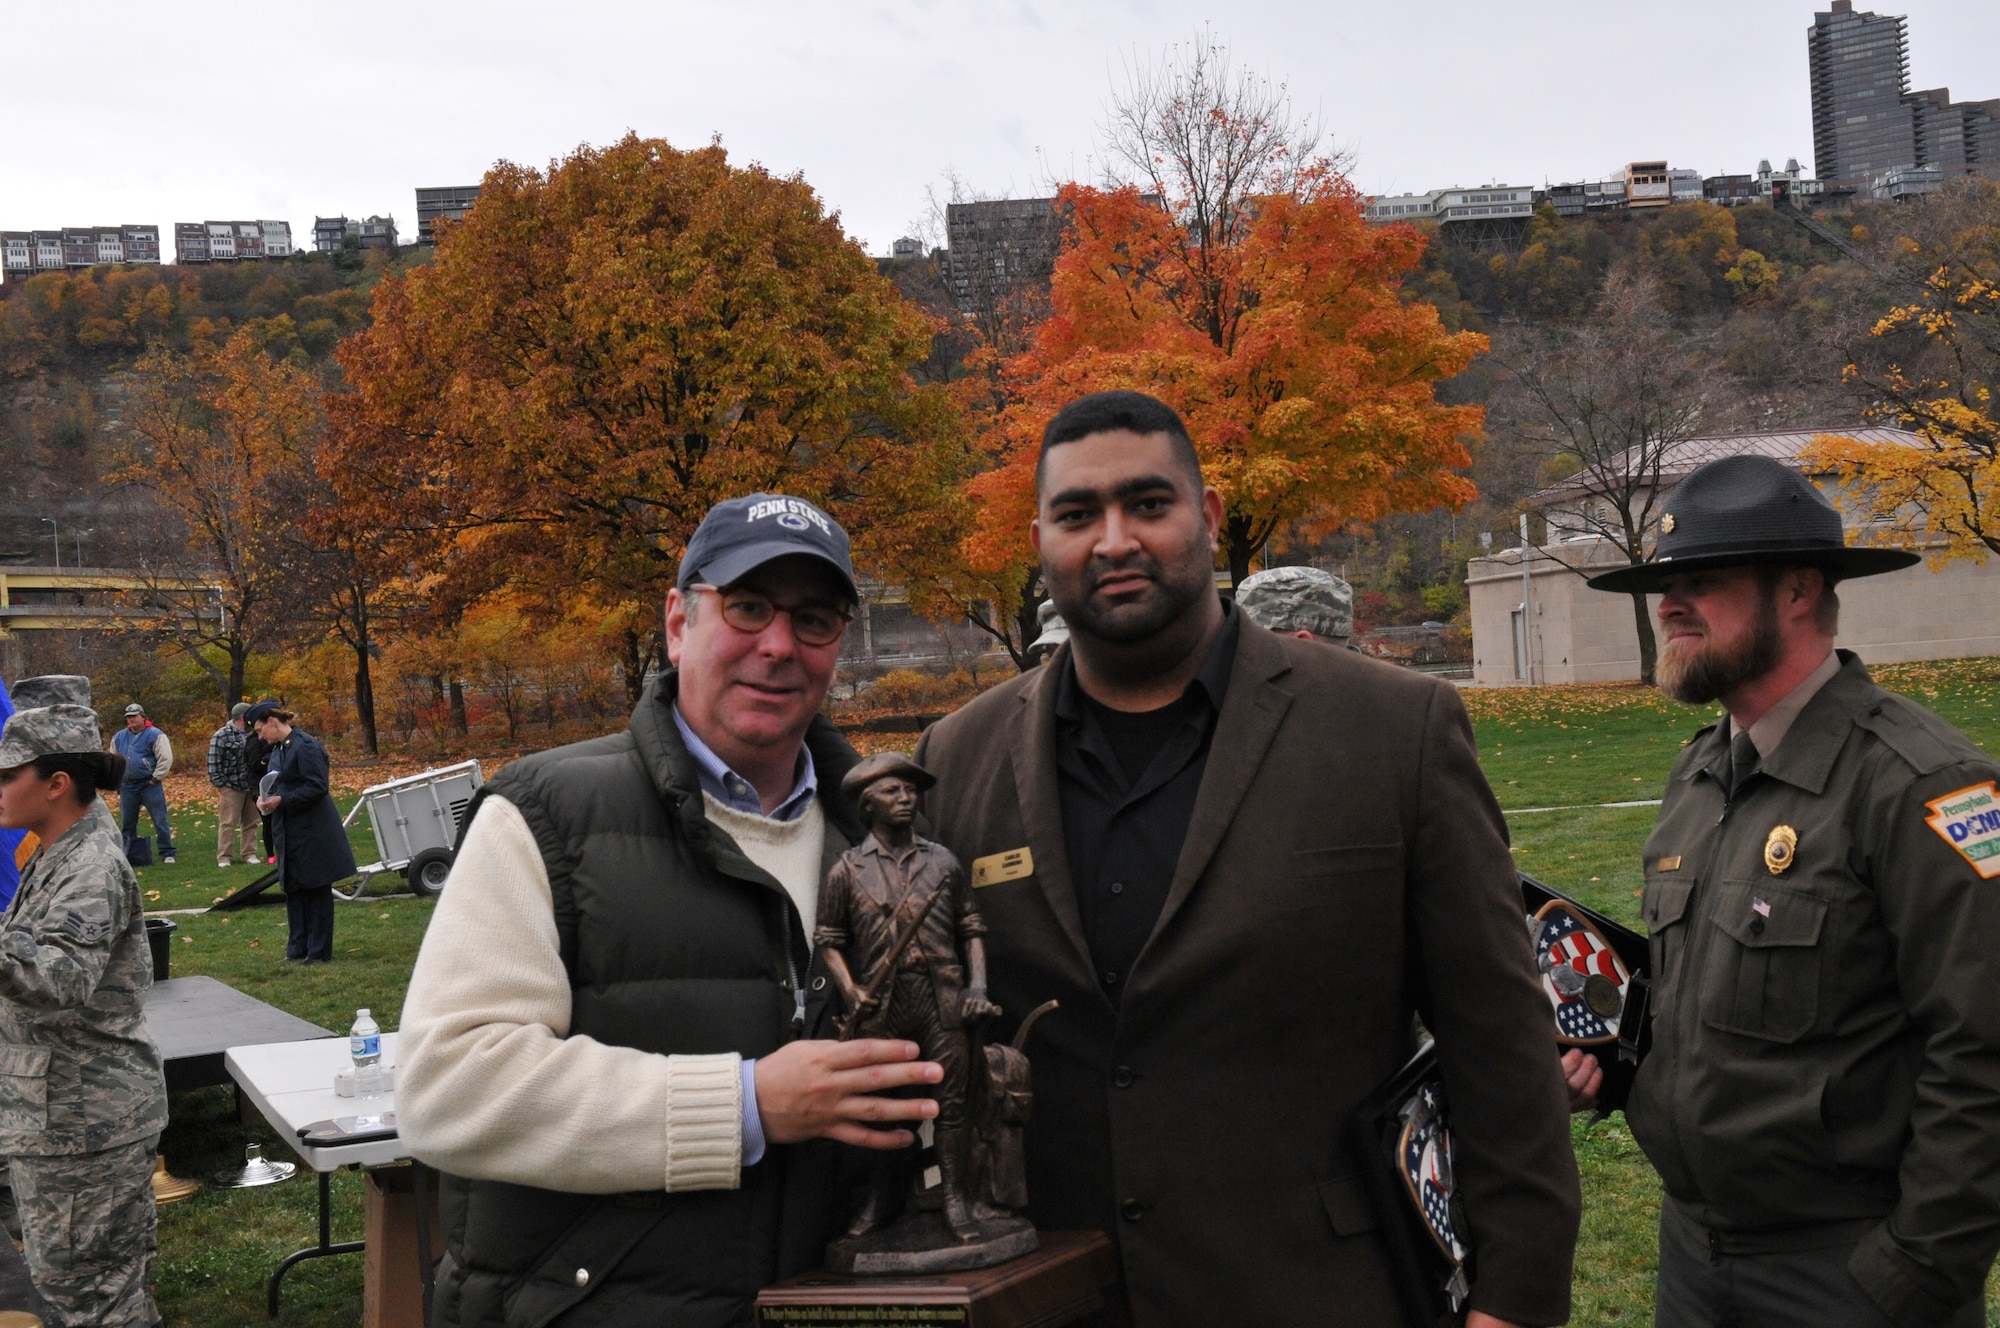 Pittsburgh Mayor Bill Peduto and Carlos Carmona from the Association of the United States Army pose for a photo at the Steel City Salutes the Troops, November 8, 2014.  The Pennsylvania National Guard joined with the Pennsylvania Department of Conservation of Natural Resources' Point State Park and the Association of the United States Army to organize Steel City Salutes the Troops.  The event is a celebration of the region’s military history, community impact and continued relevance. (U.S. Air National Guard photo by Staff Sgt. Michael Fariss/ Released)